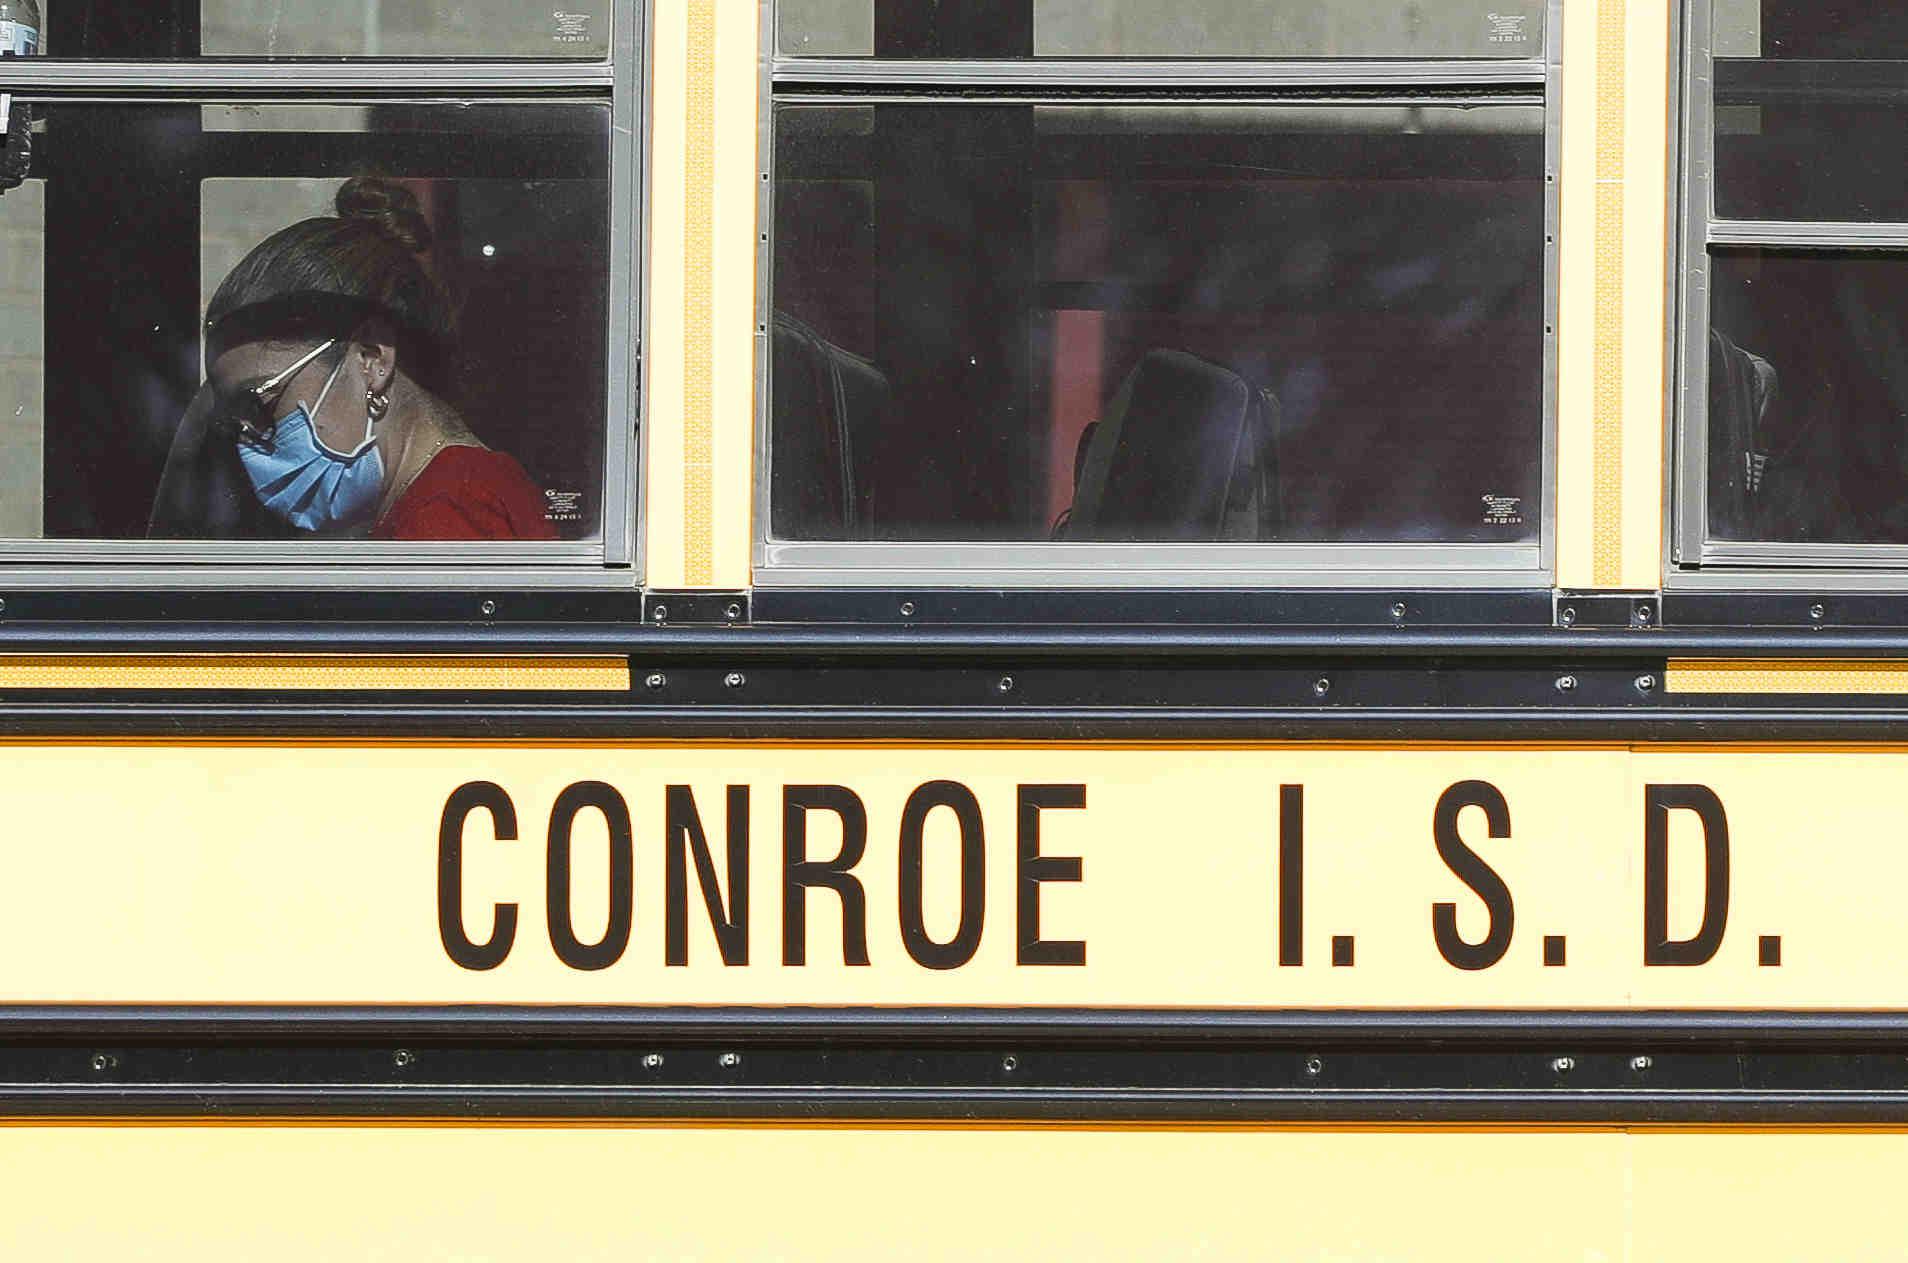 Conroe Isd Calendar 2022 23 Conroe Isd Approves Its 2022-23 School Calendar With Aug. 10 Start Date